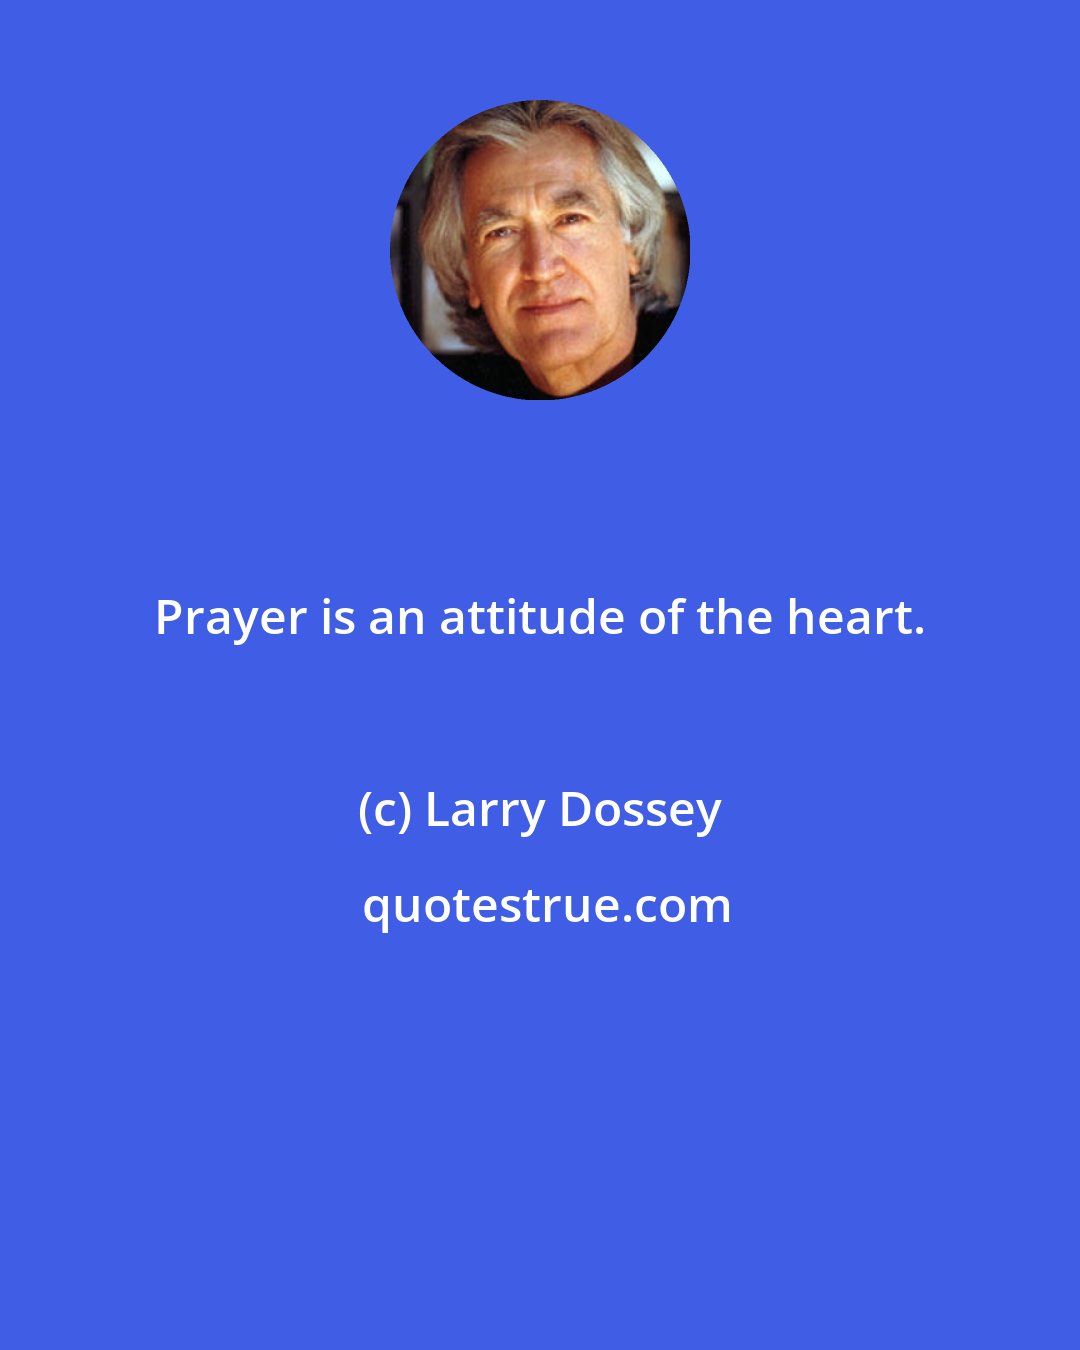 Larry Dossey: Prayer is an attitude of the heart.